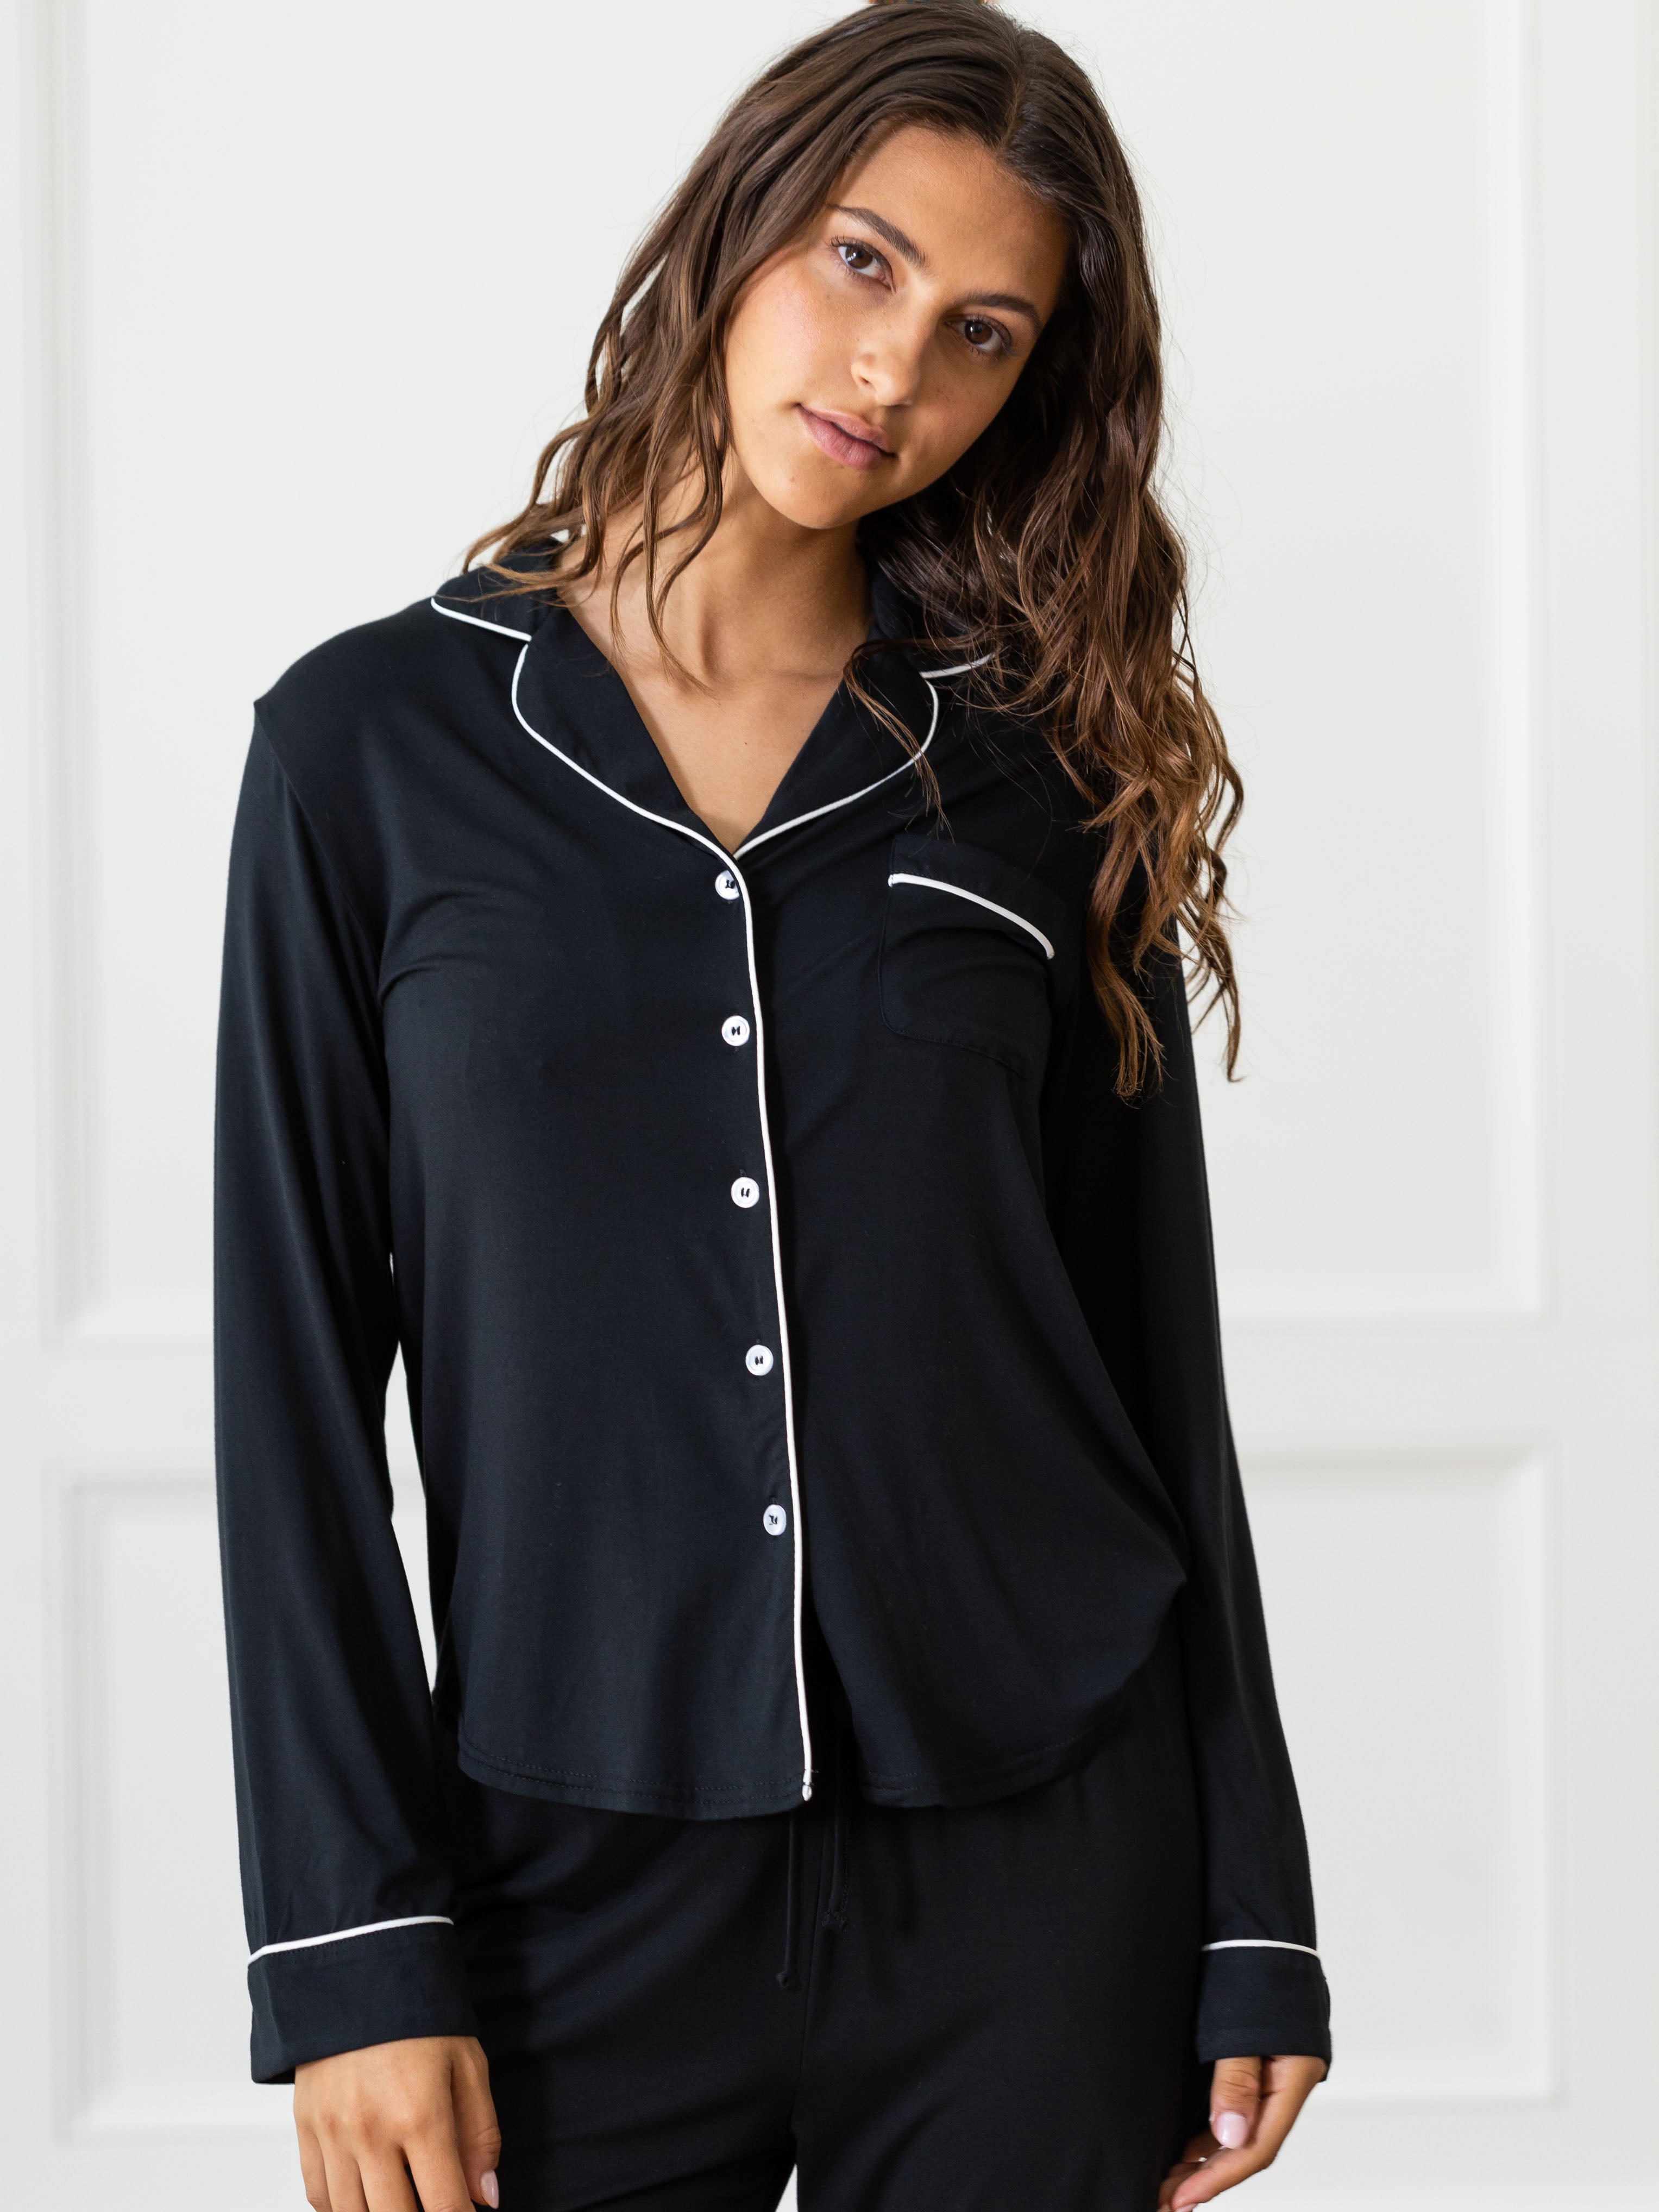 Black Long Sleeve Pajama Set modeled by a woman. The photo was taken in a light setting, showing off the colors and lines of the pajamas. |Color:Black